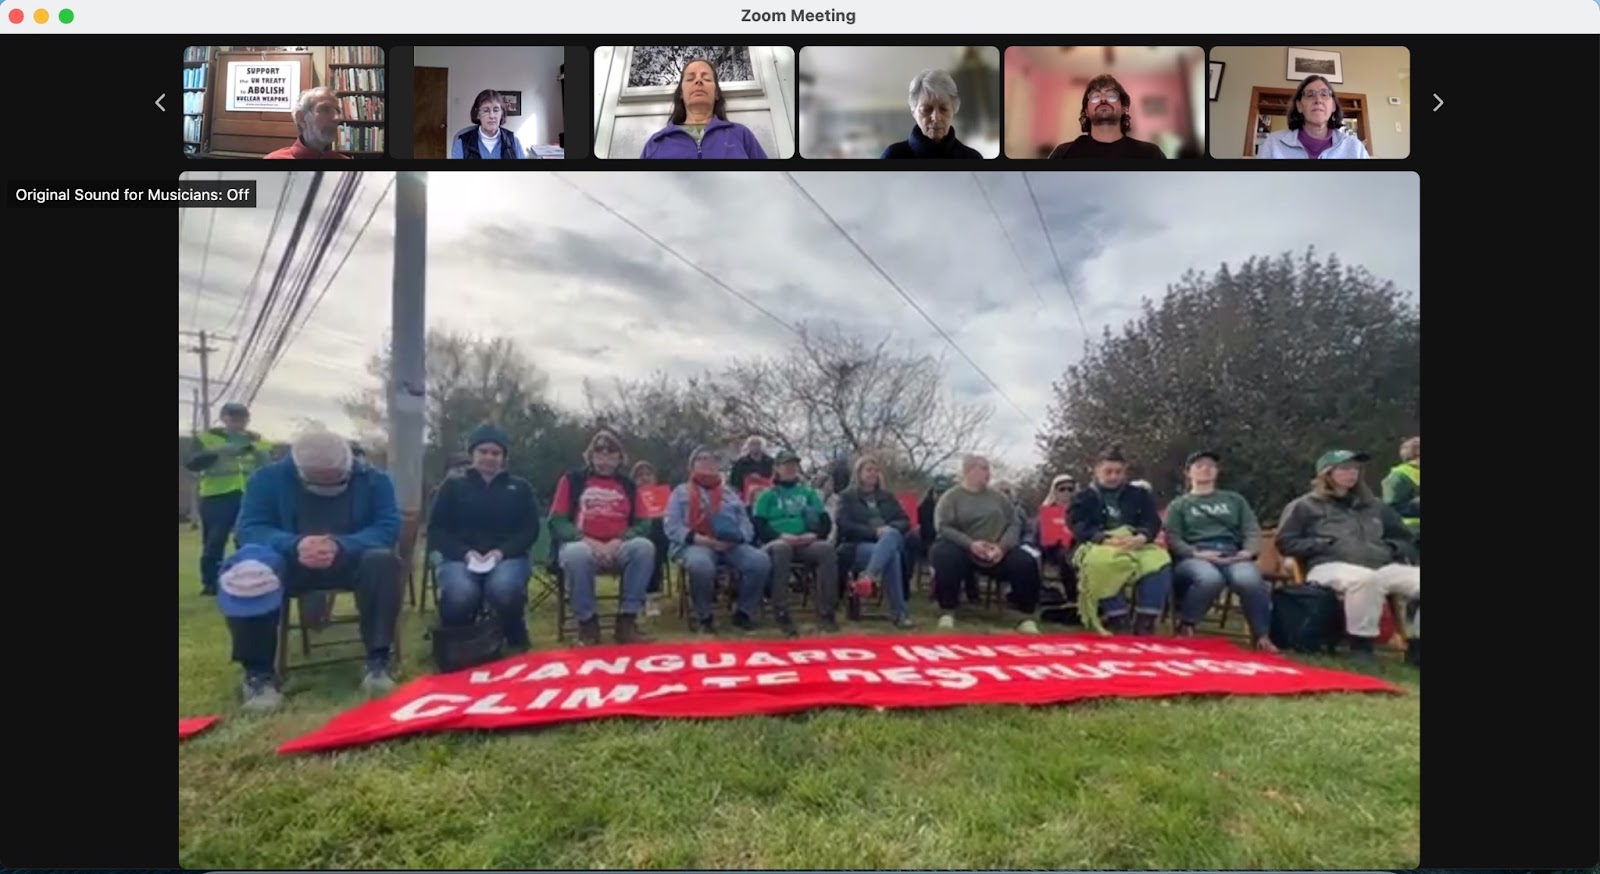 Screenshot of a Zoom video meeting. The largest video is of a group of people seated outside in poses of reflection and with a large red and white protest banner in front of them. Above that large video is a row of smaller videos showing individuals inside, seemingly in their homes, also in poses of reflection. 